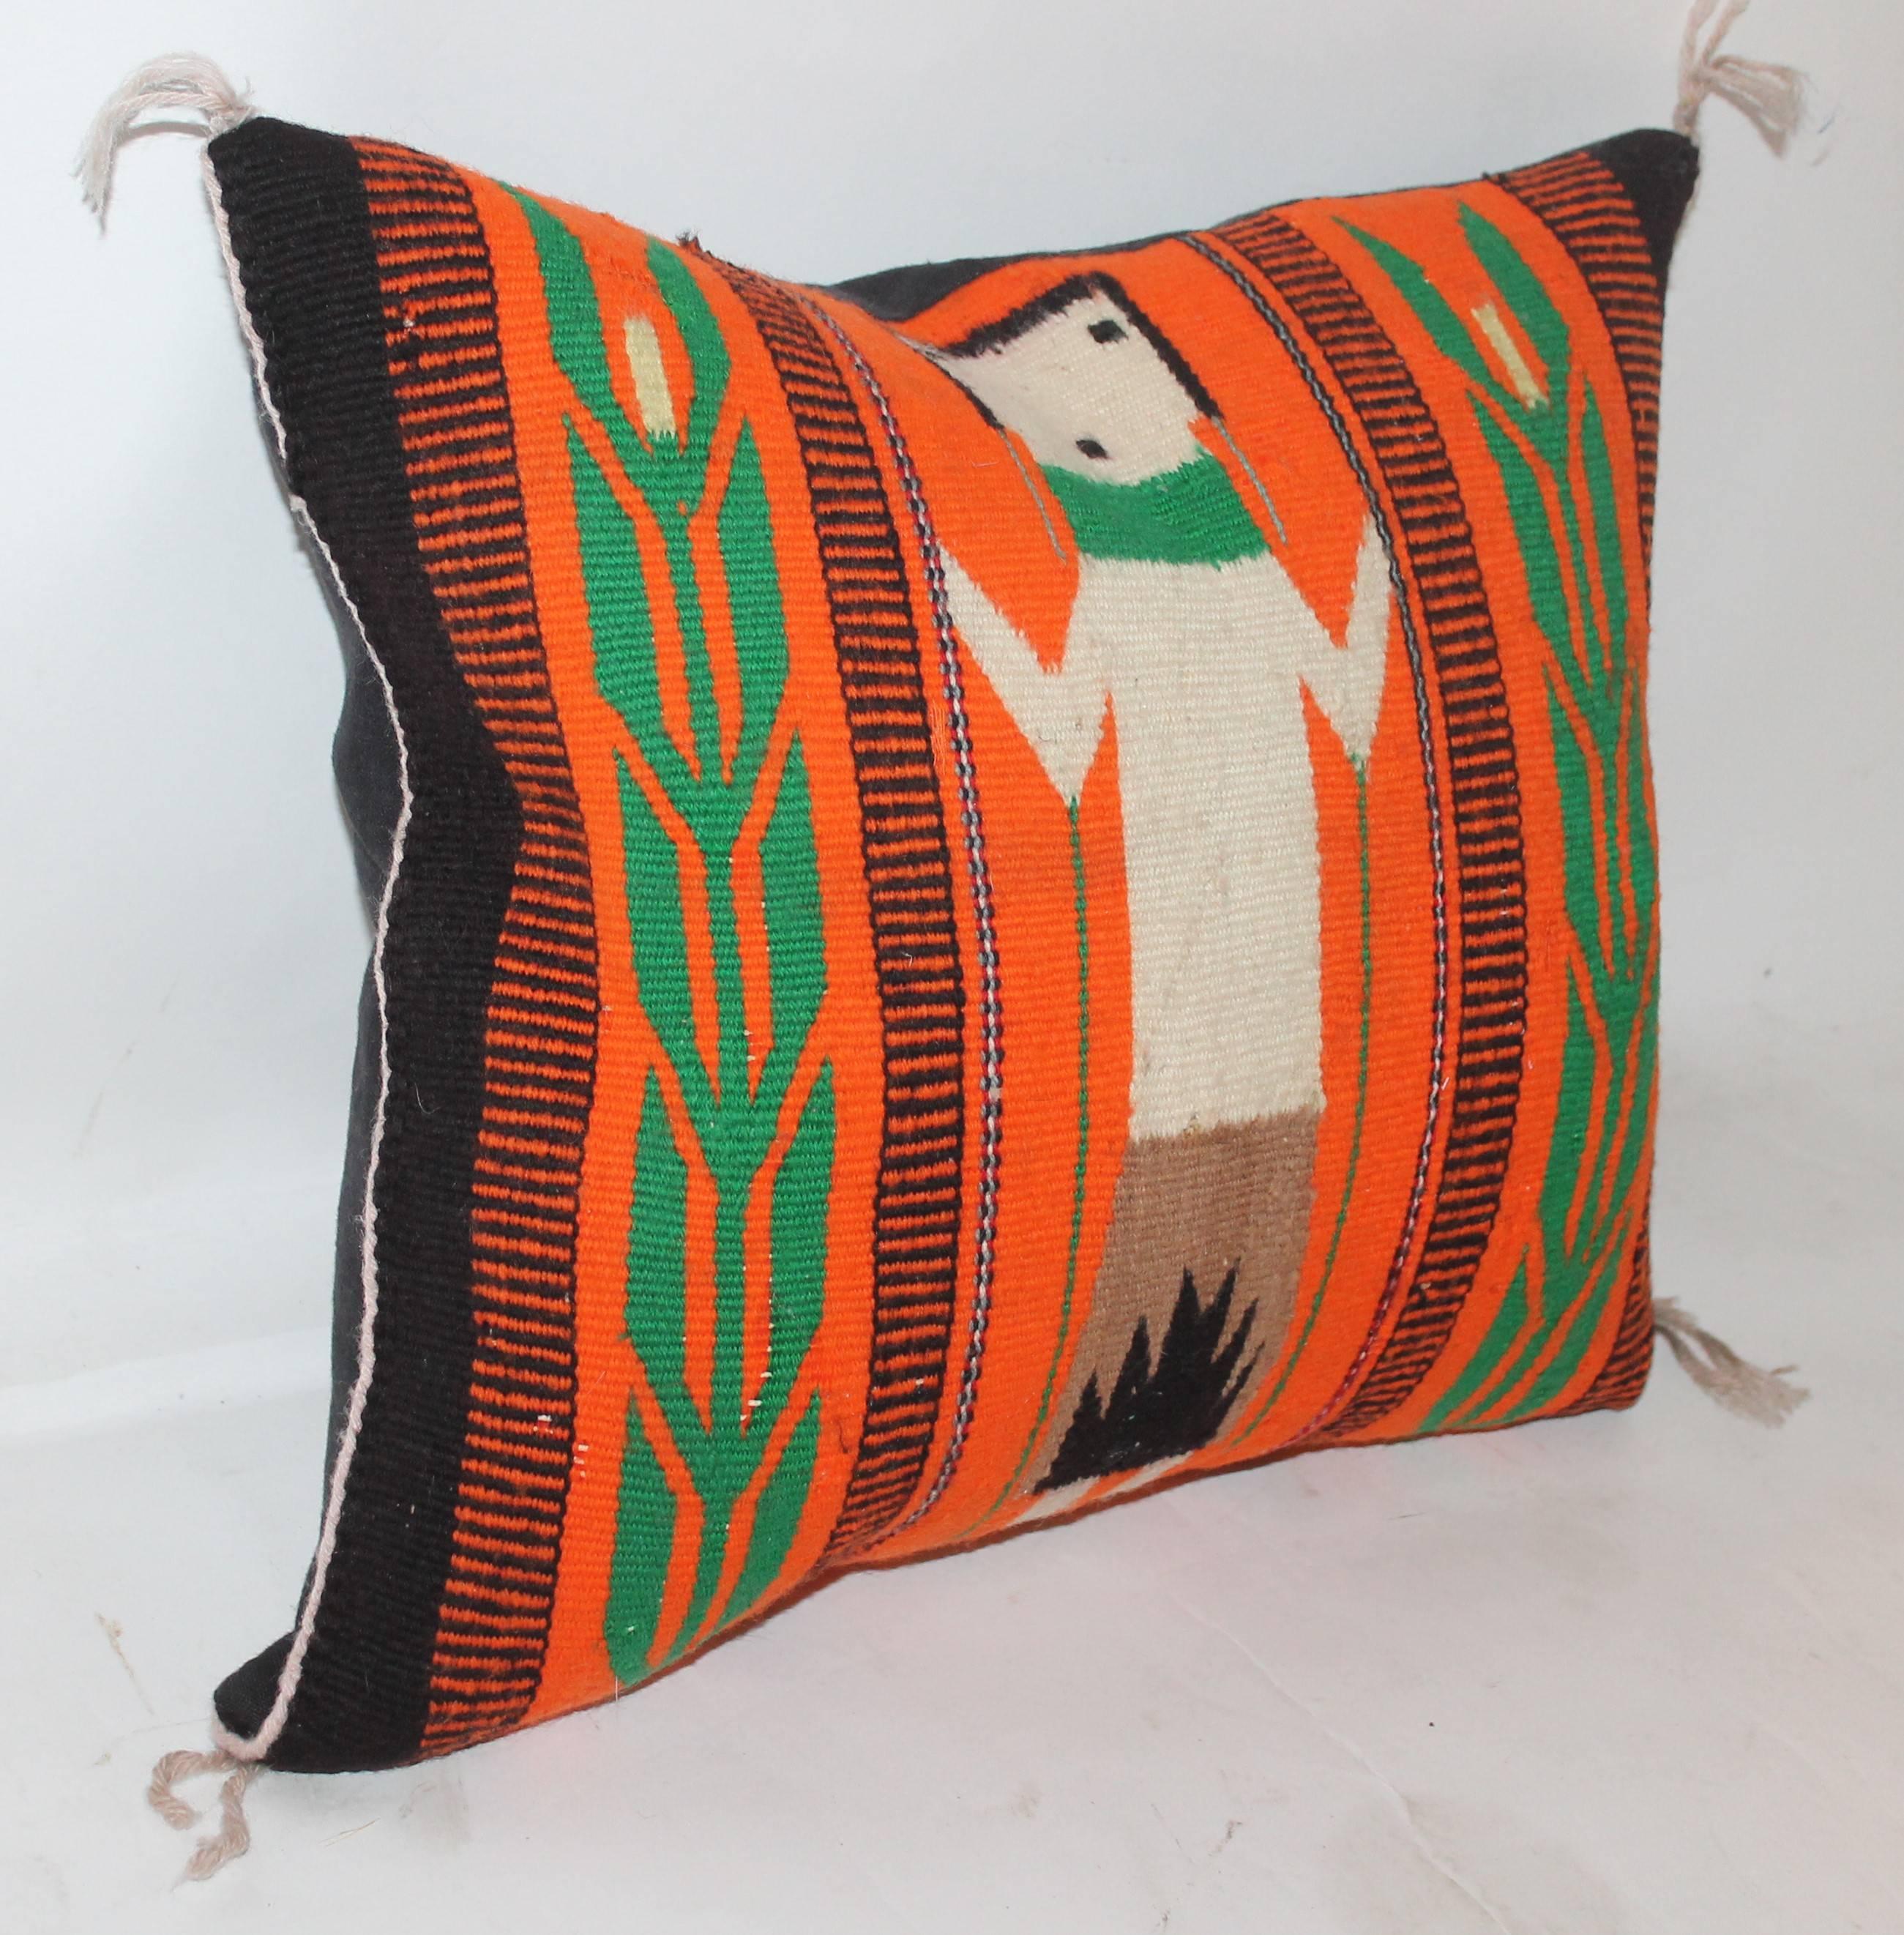 Navajo Indian weaving with a vivid orange back round color. This small gem is in Fine condition and is quite rare or unusual to see. The backing is in black cotton linen.